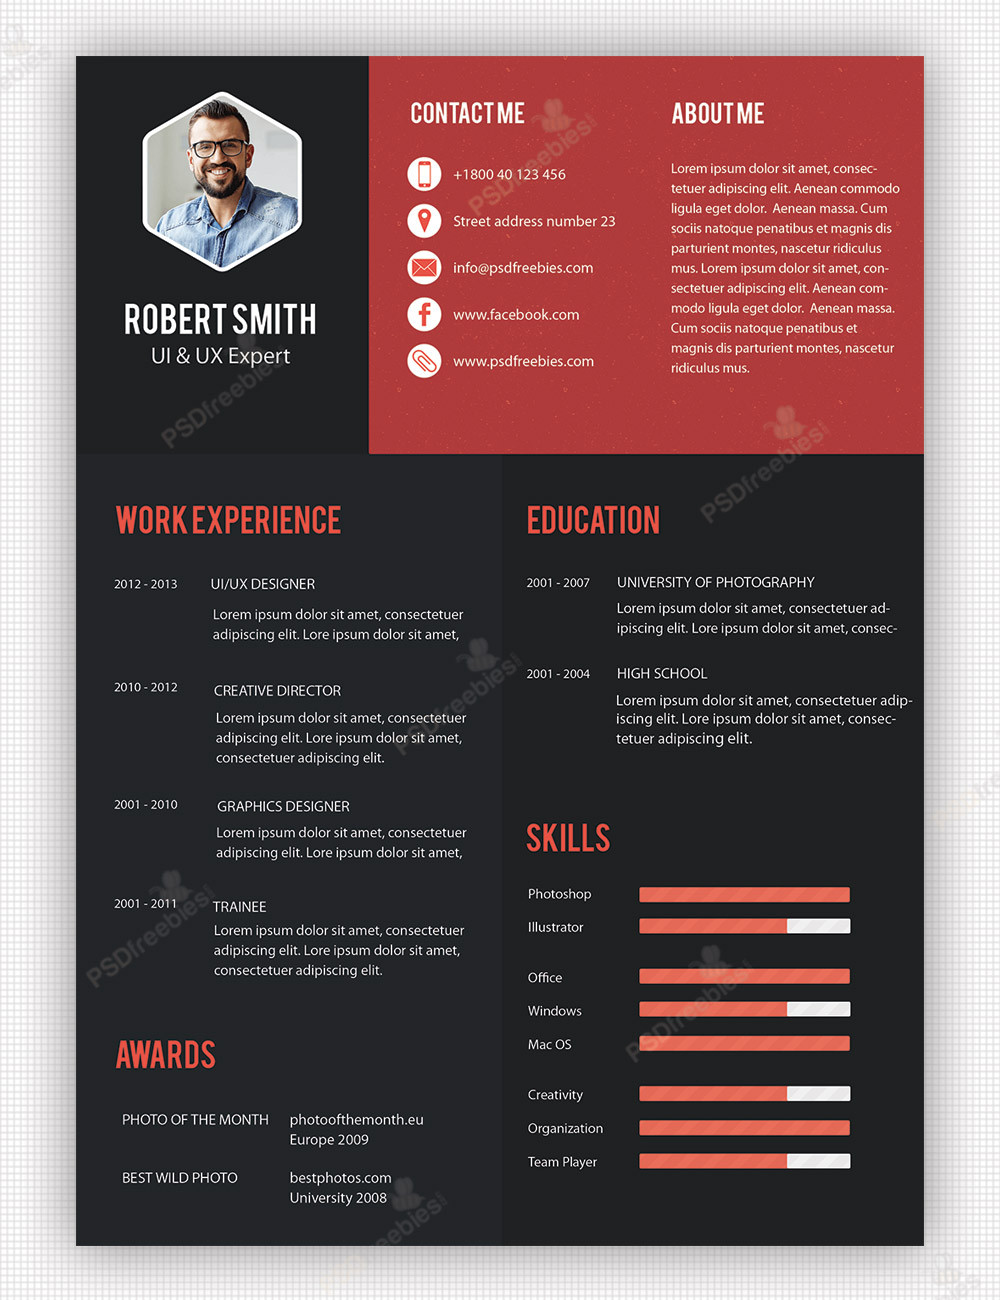 Eye Catching Resume Templates Free Download Creative Professional Resume Template Free Psd â Psdfreebies.com